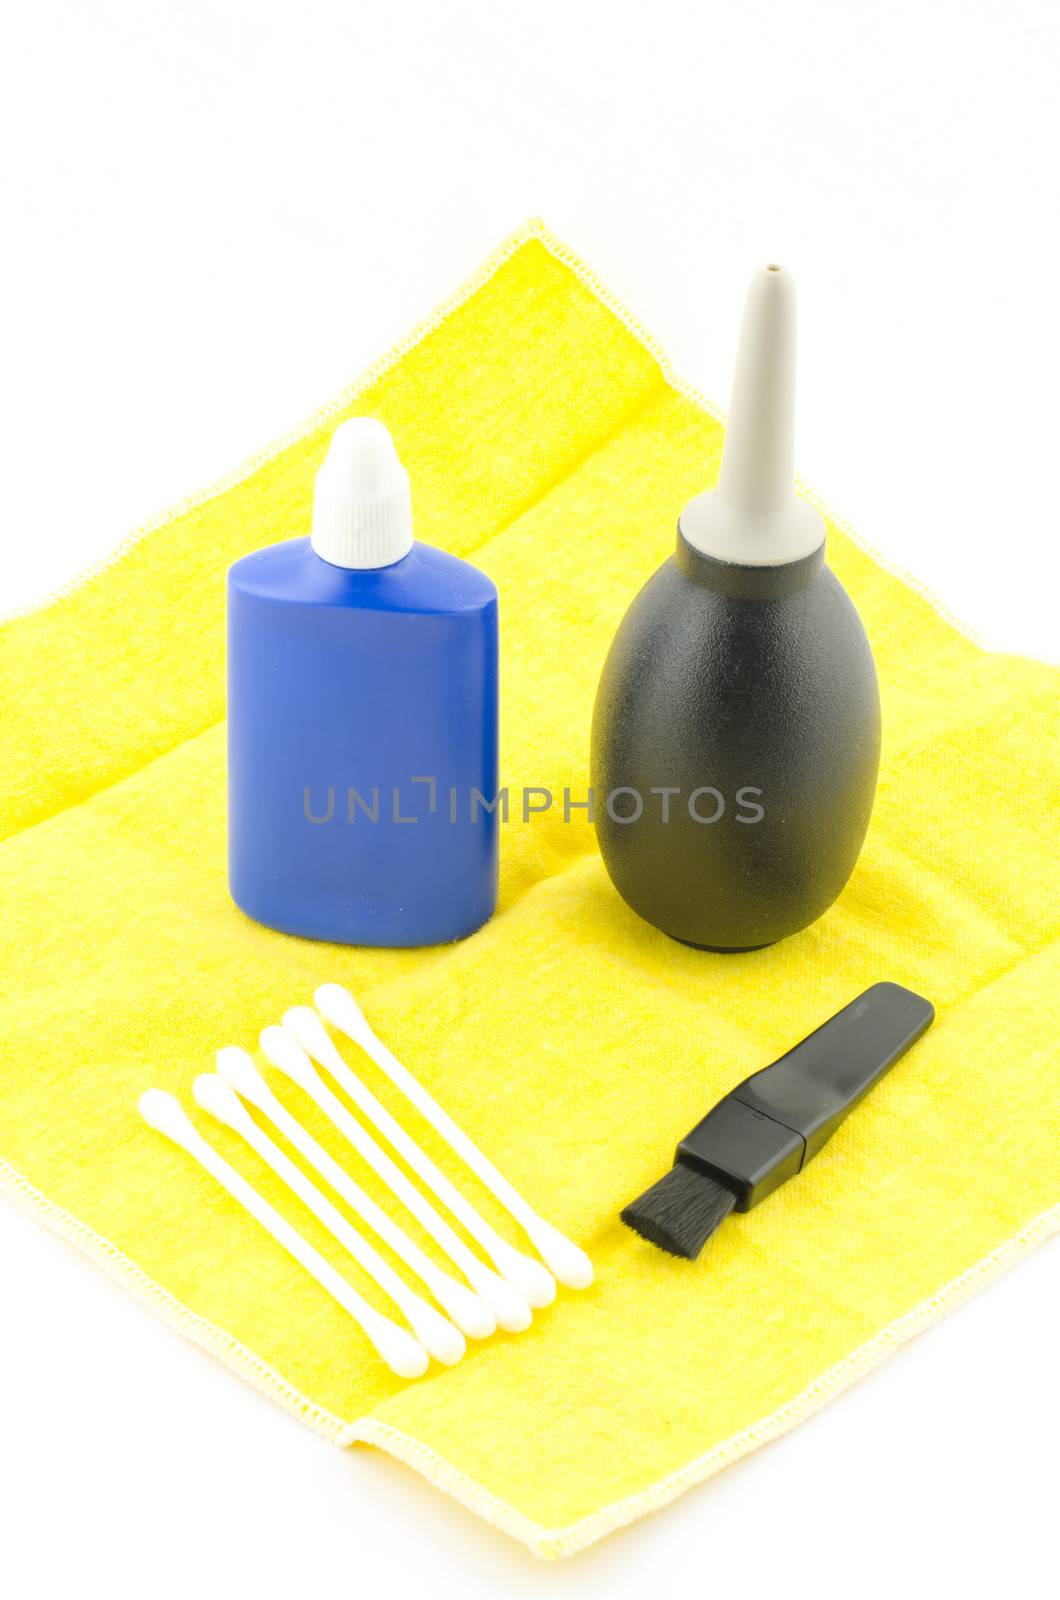 cleaning camera lens set isolated on white background